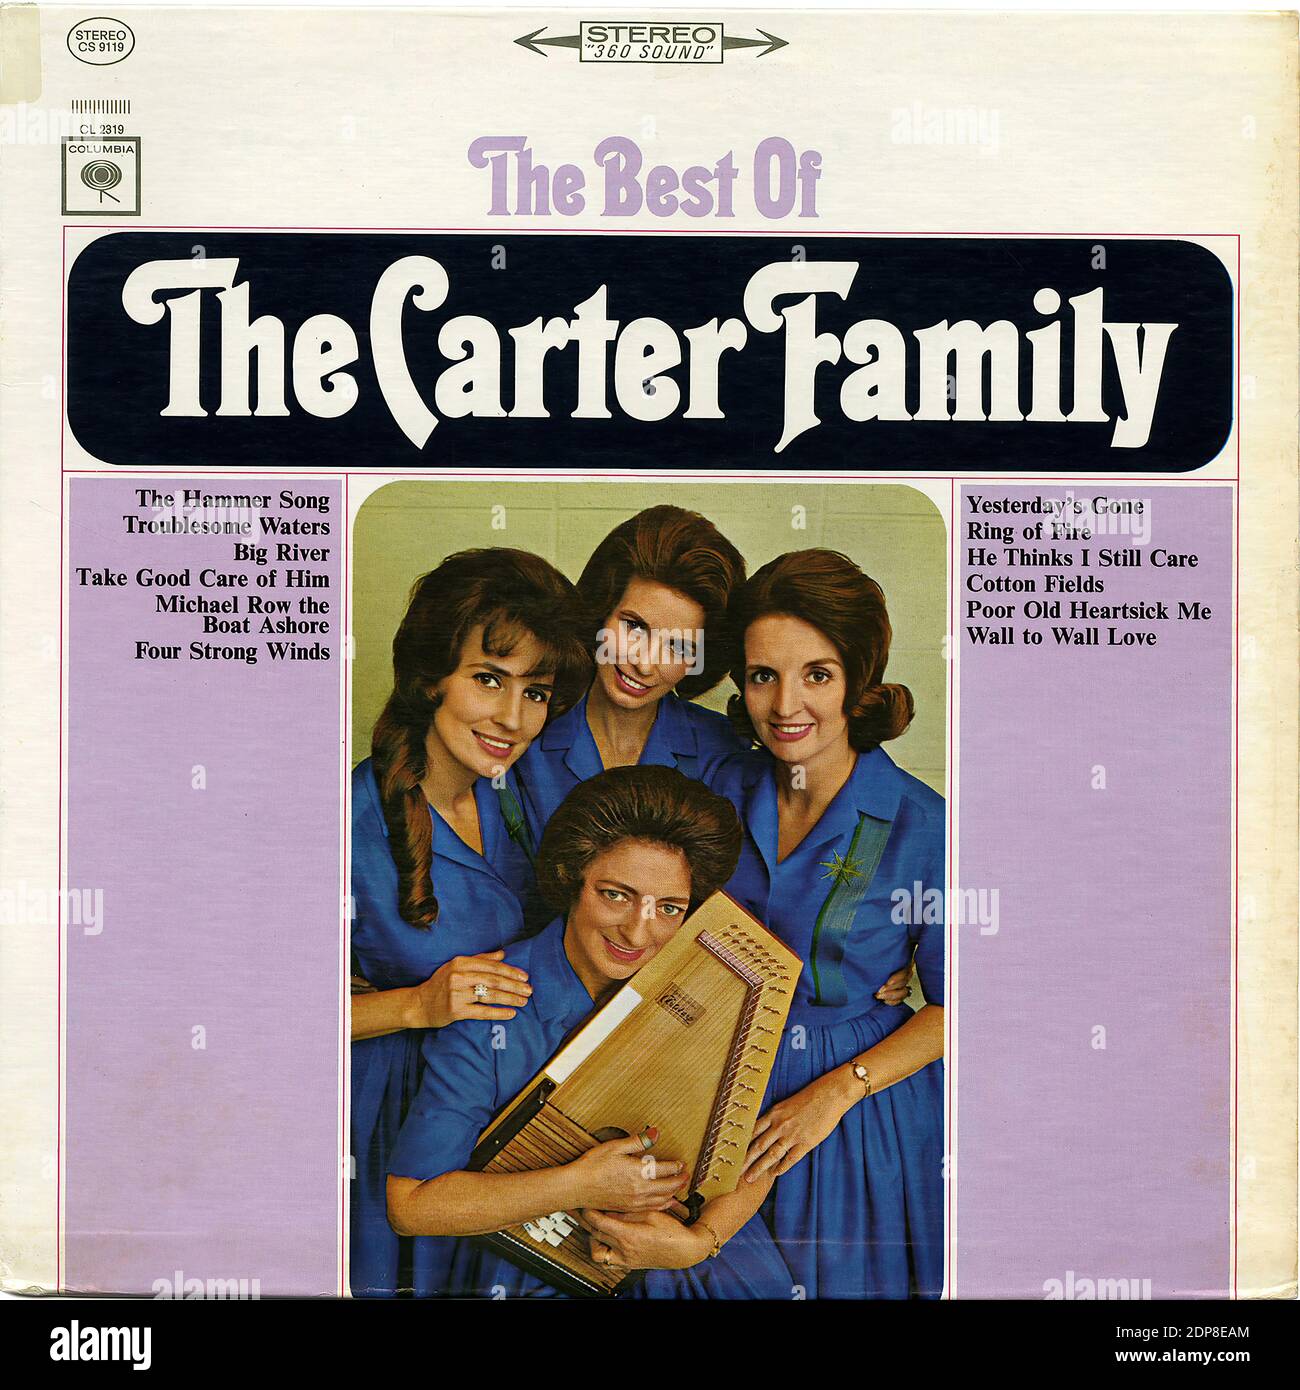 The Best of the Carter Family - Vintage Record Cover Stock Photo